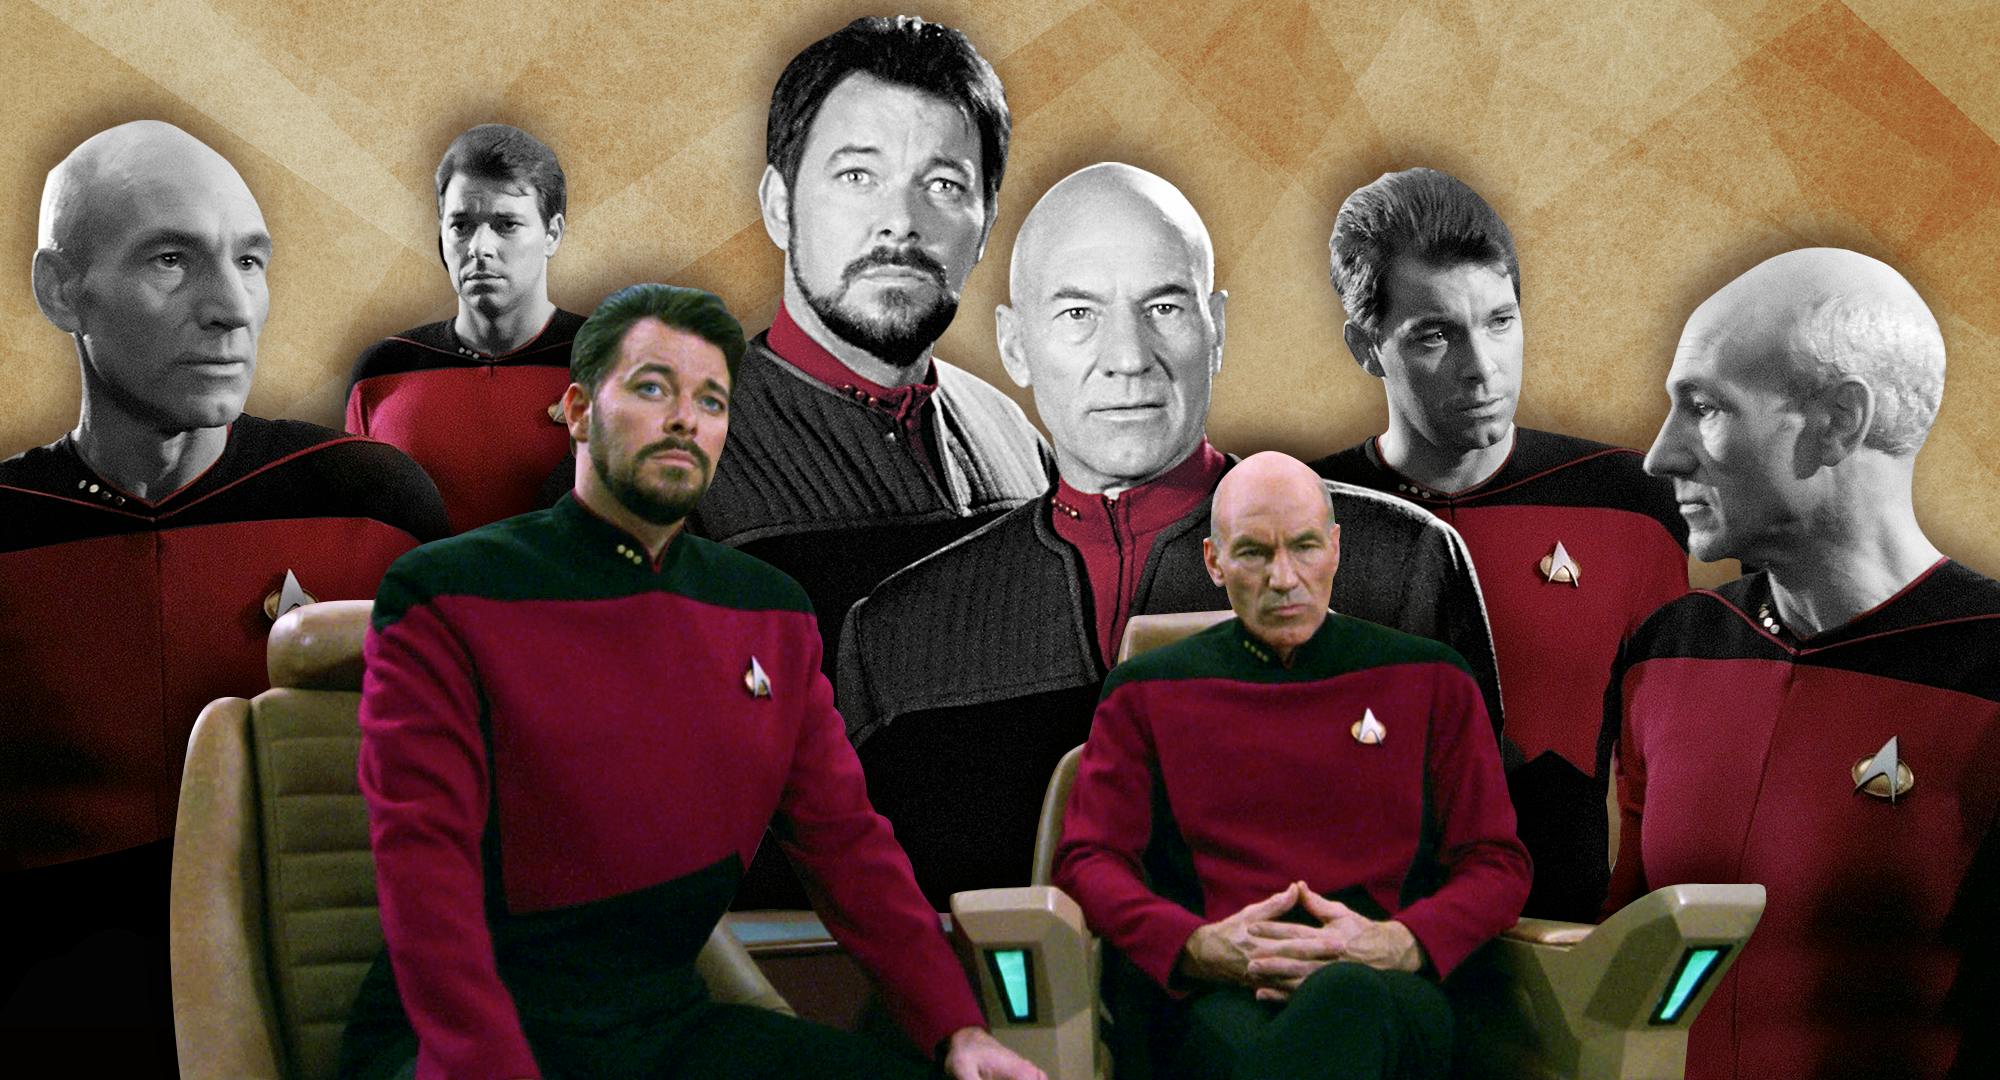 Captain Picard and William Riker